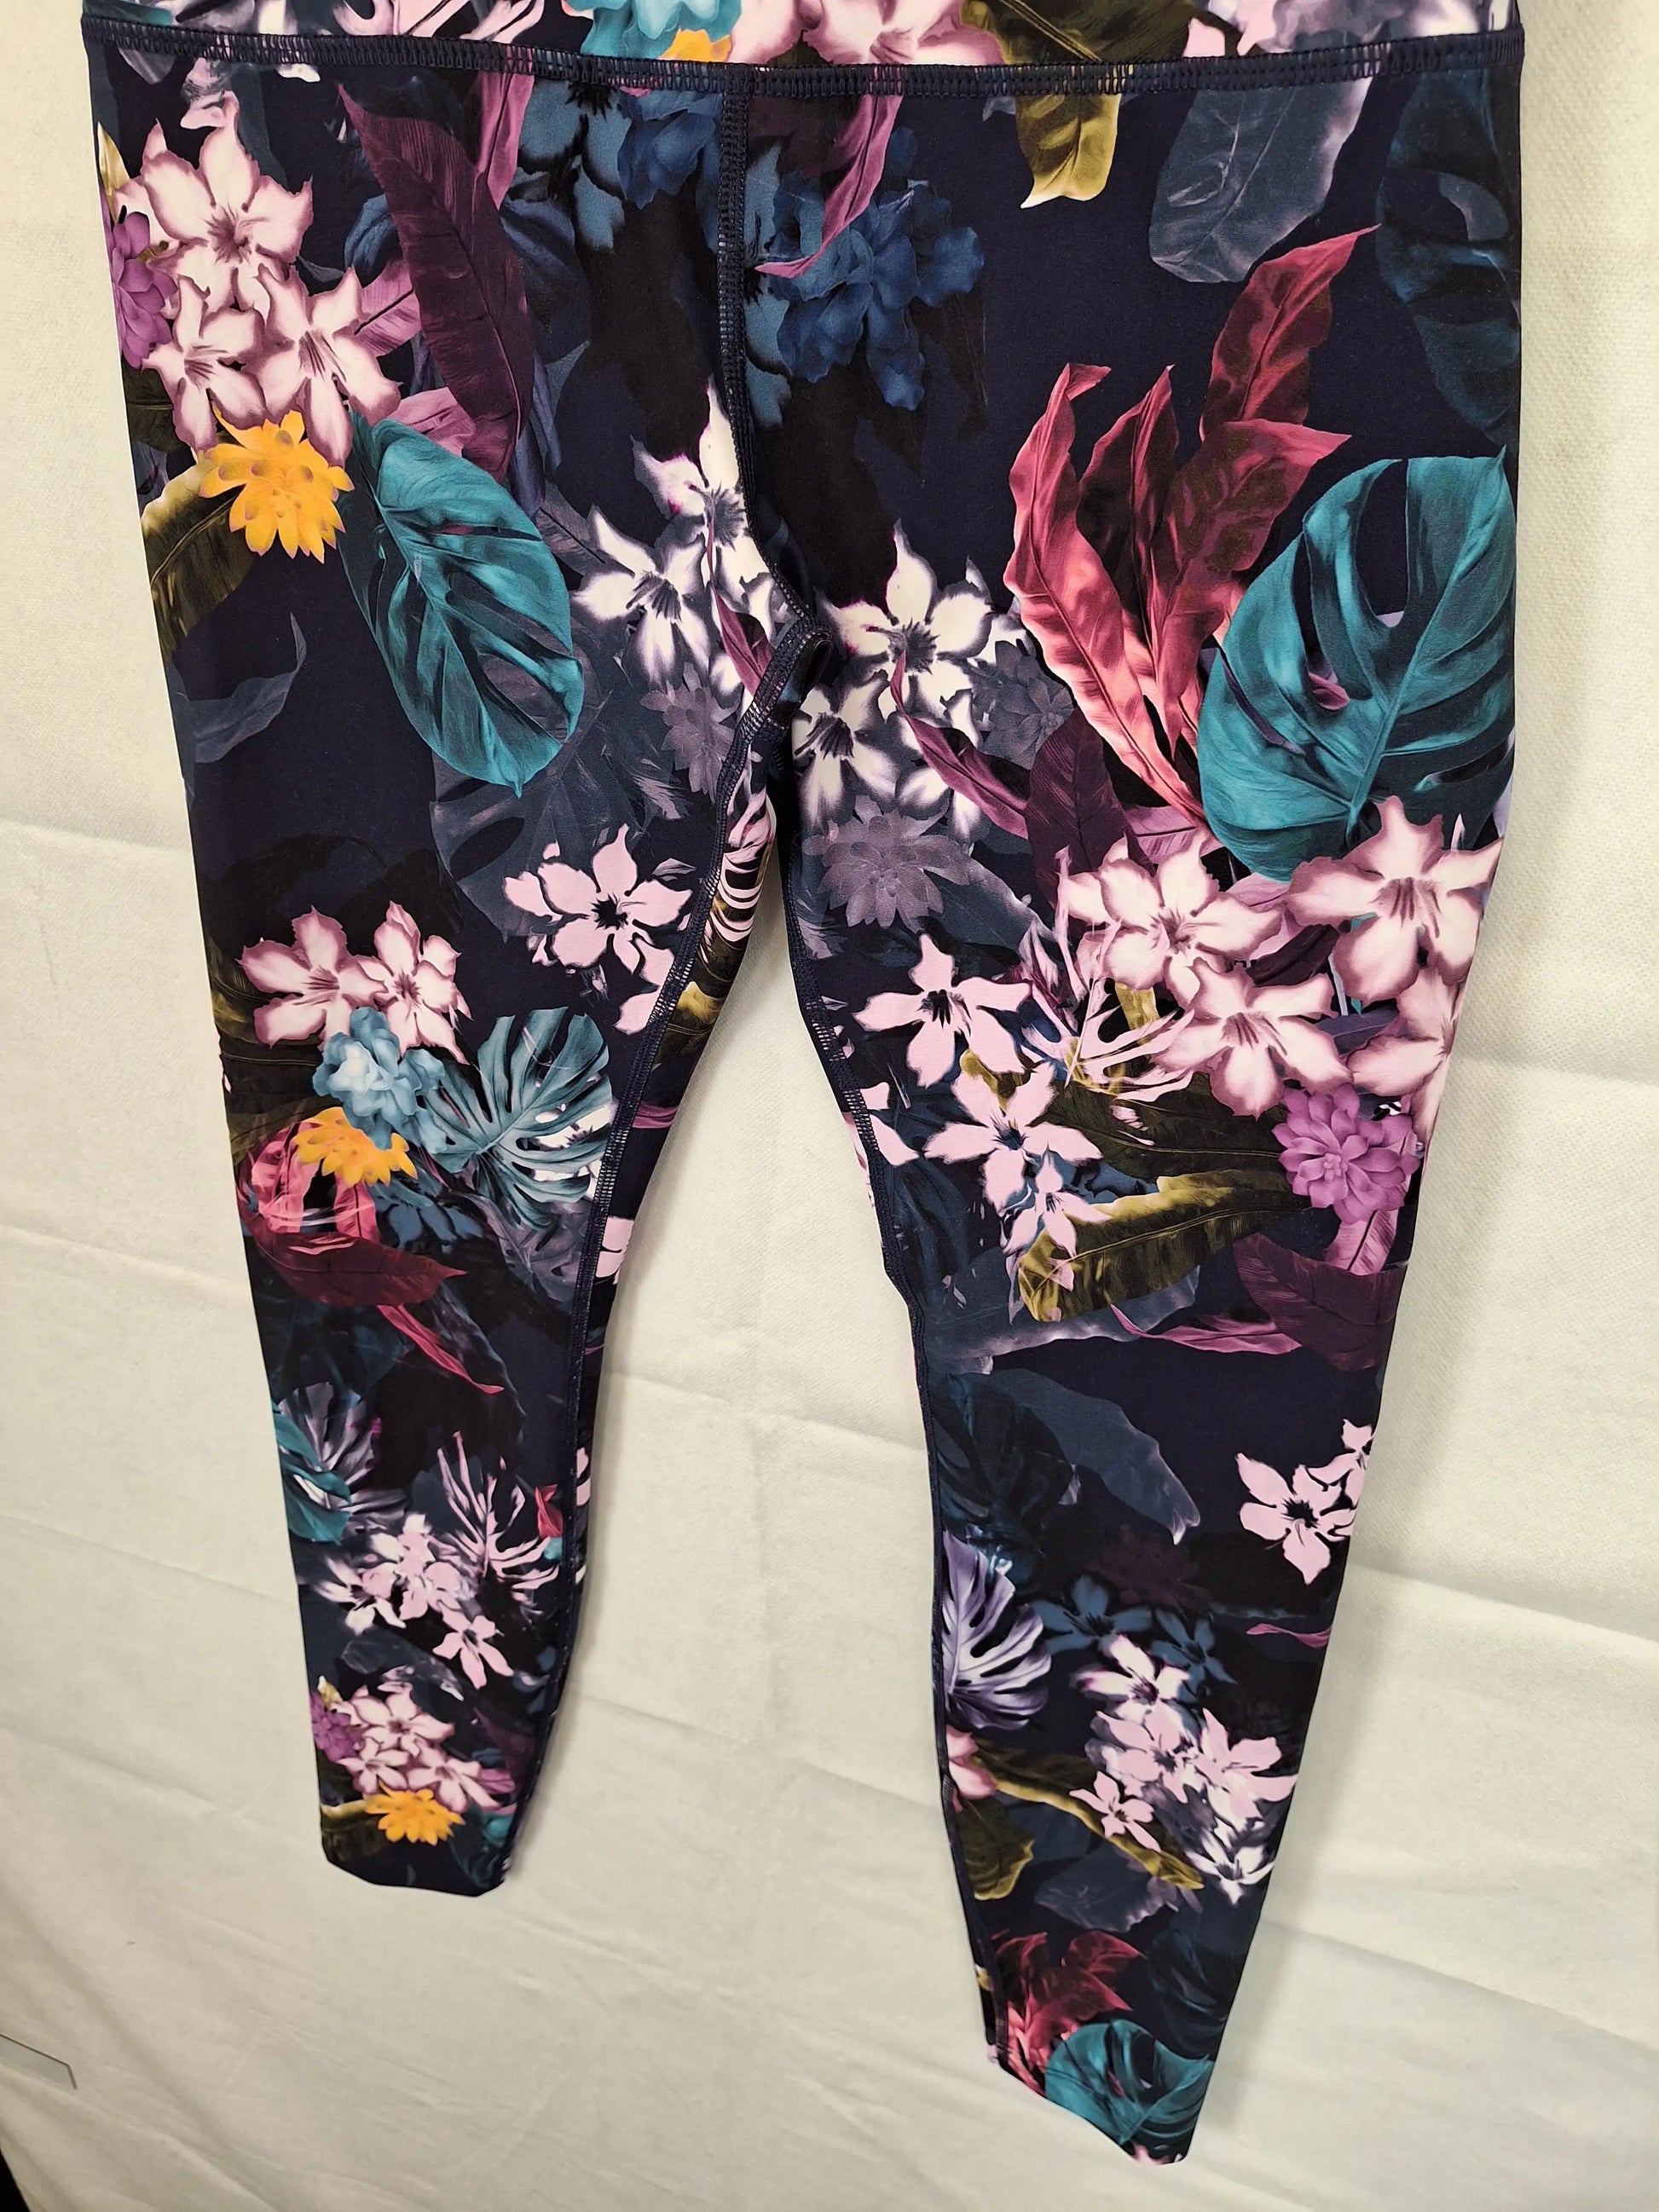 Free People FP Movement floral leggings size medium - $52 - From Gina